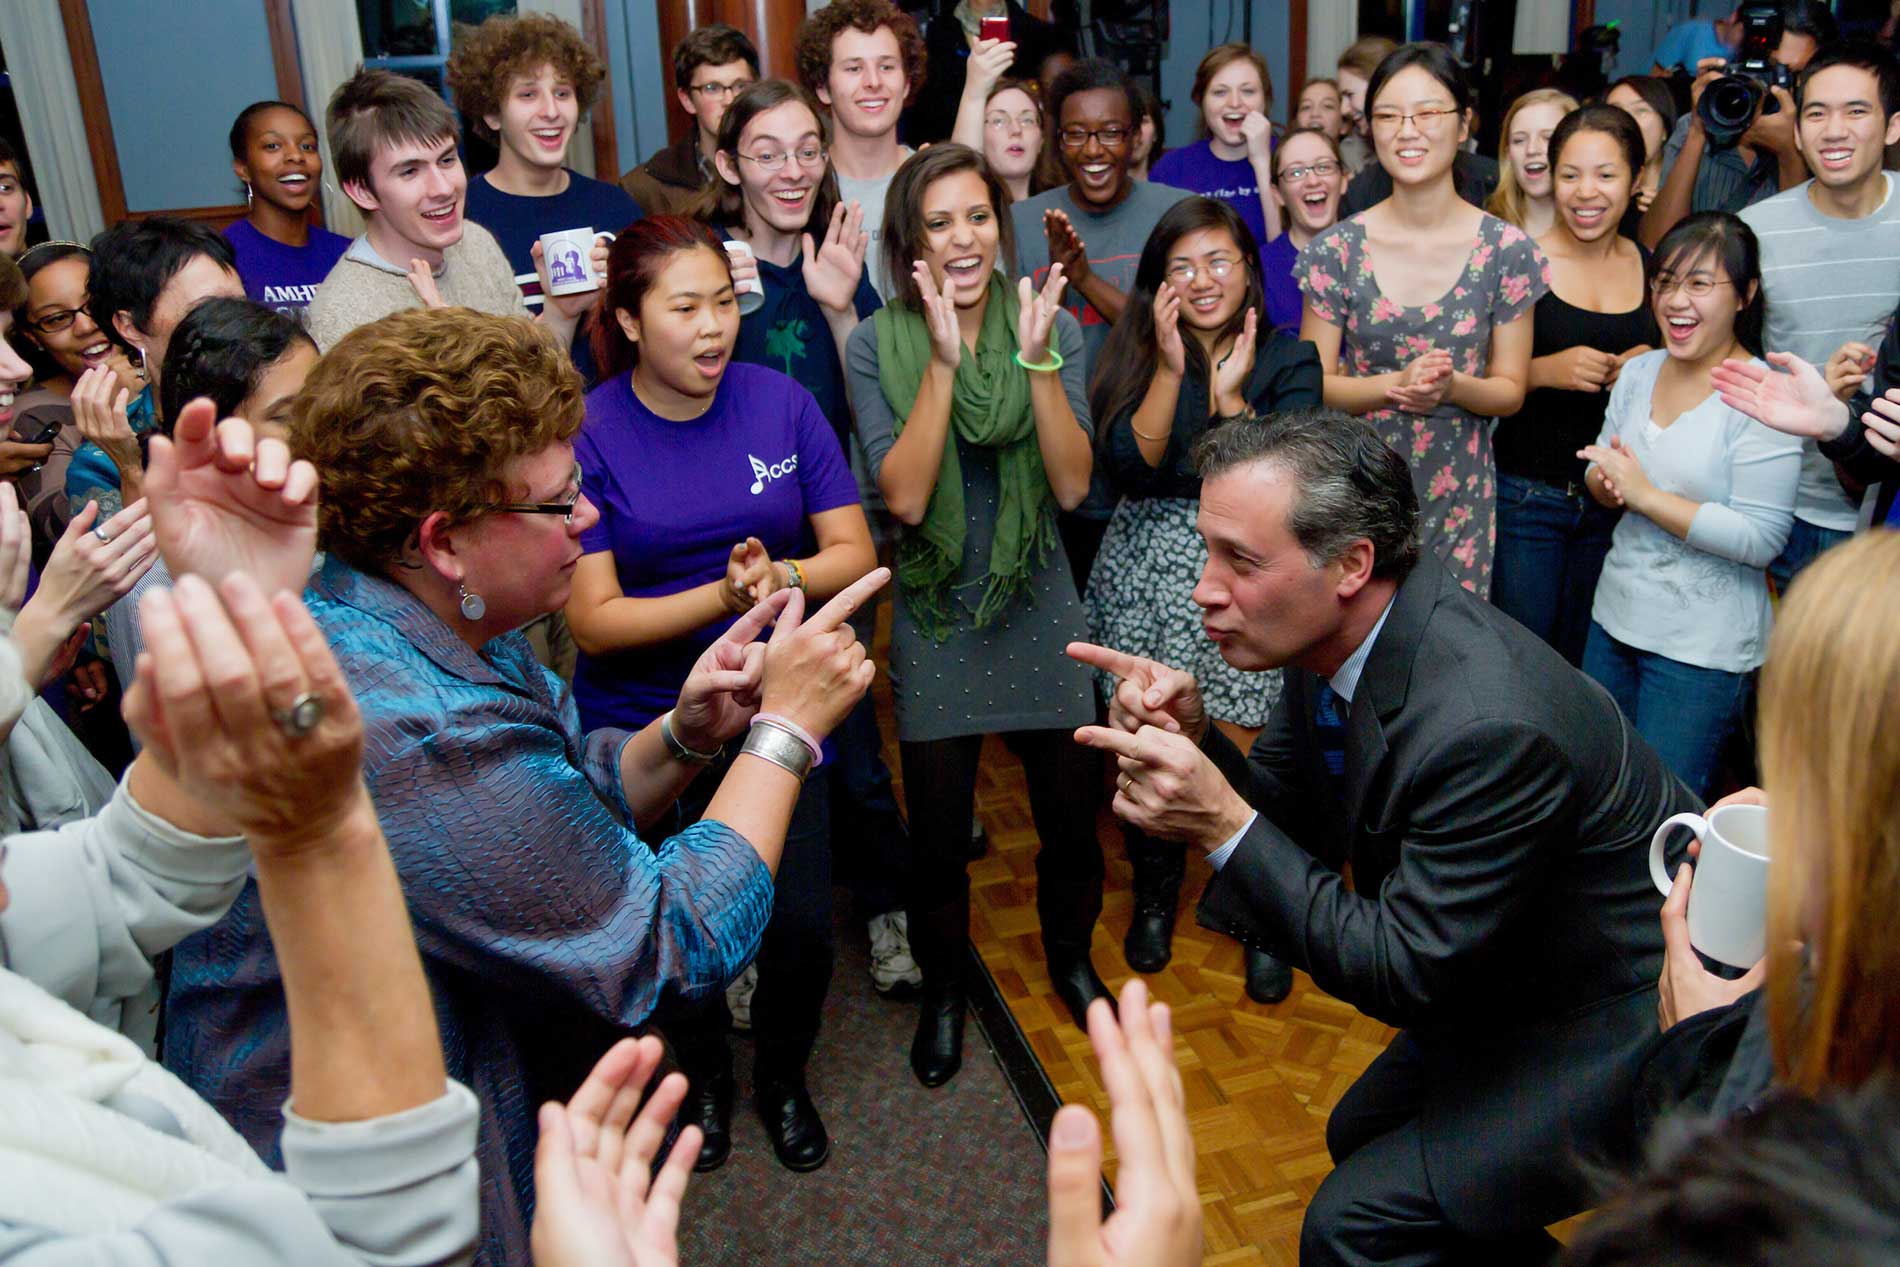 President Martin and past president Tony Marx dance playfully while surrounded by students.